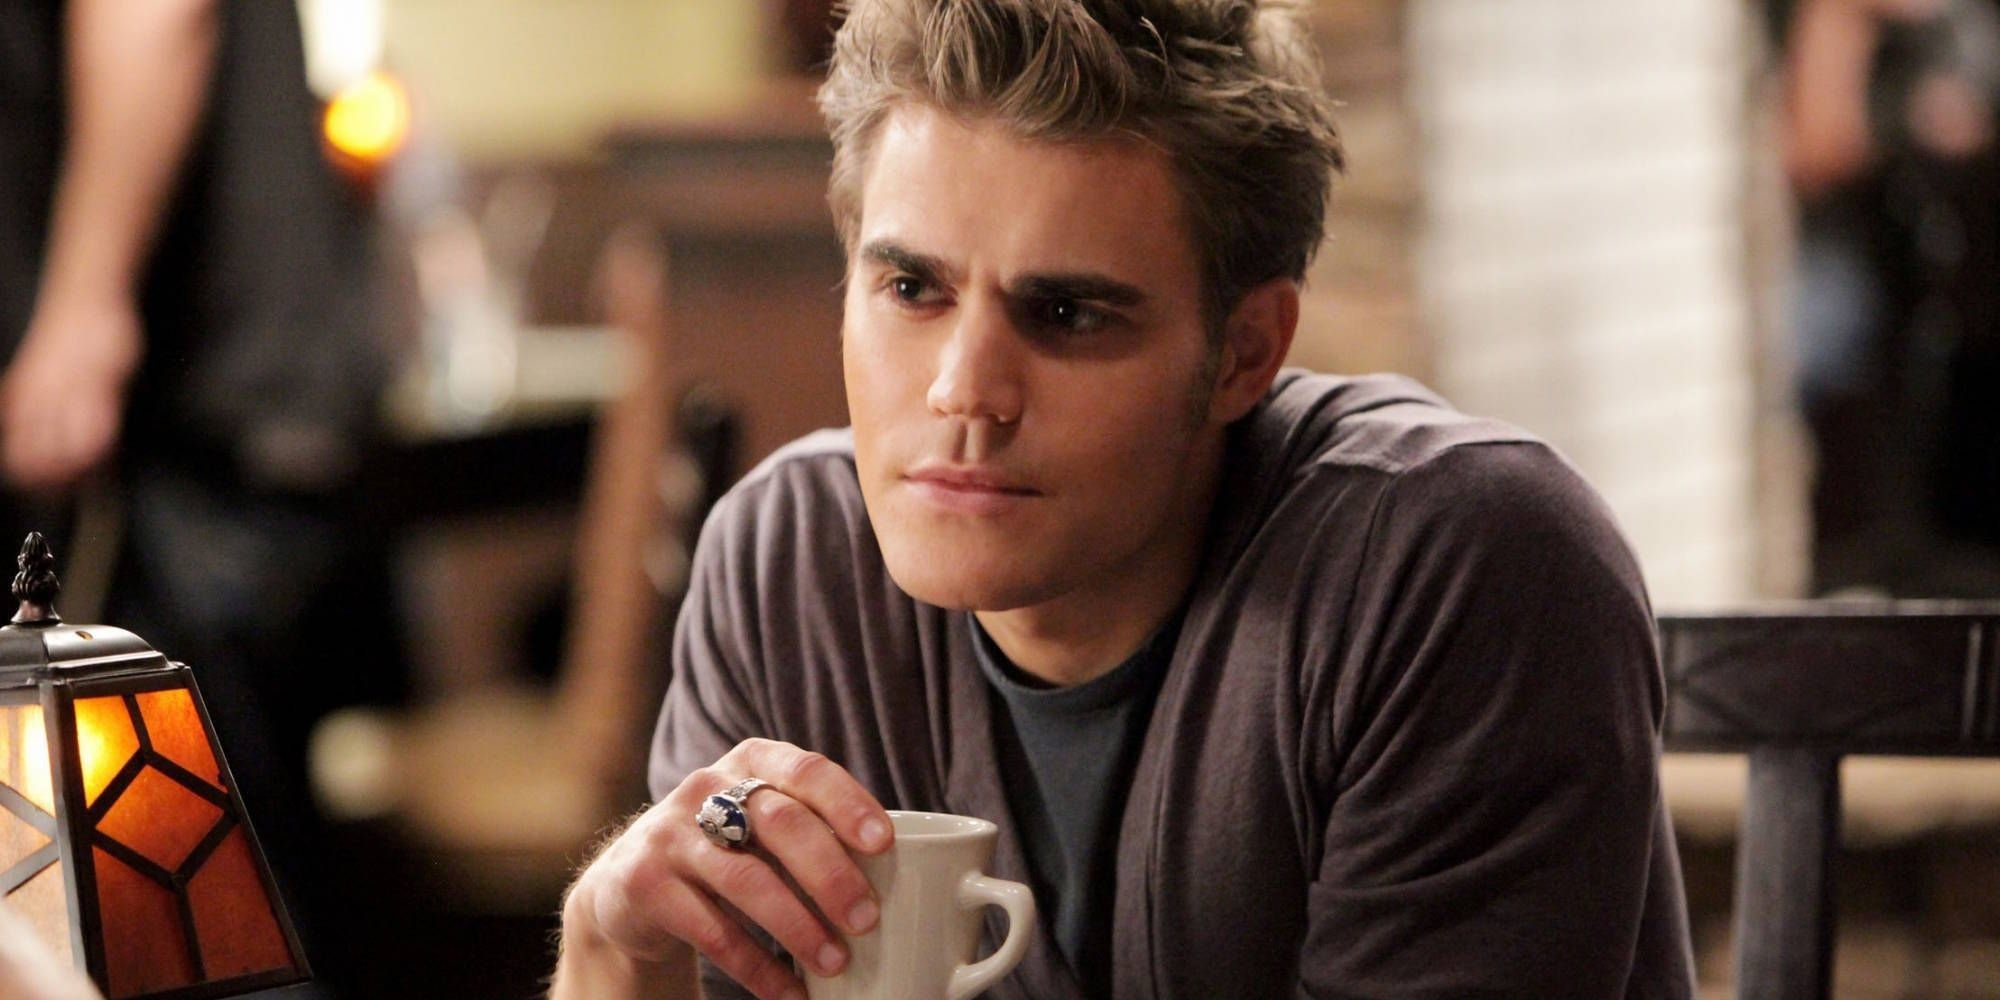 Stefan sipping Tea on The Vampire Diaries